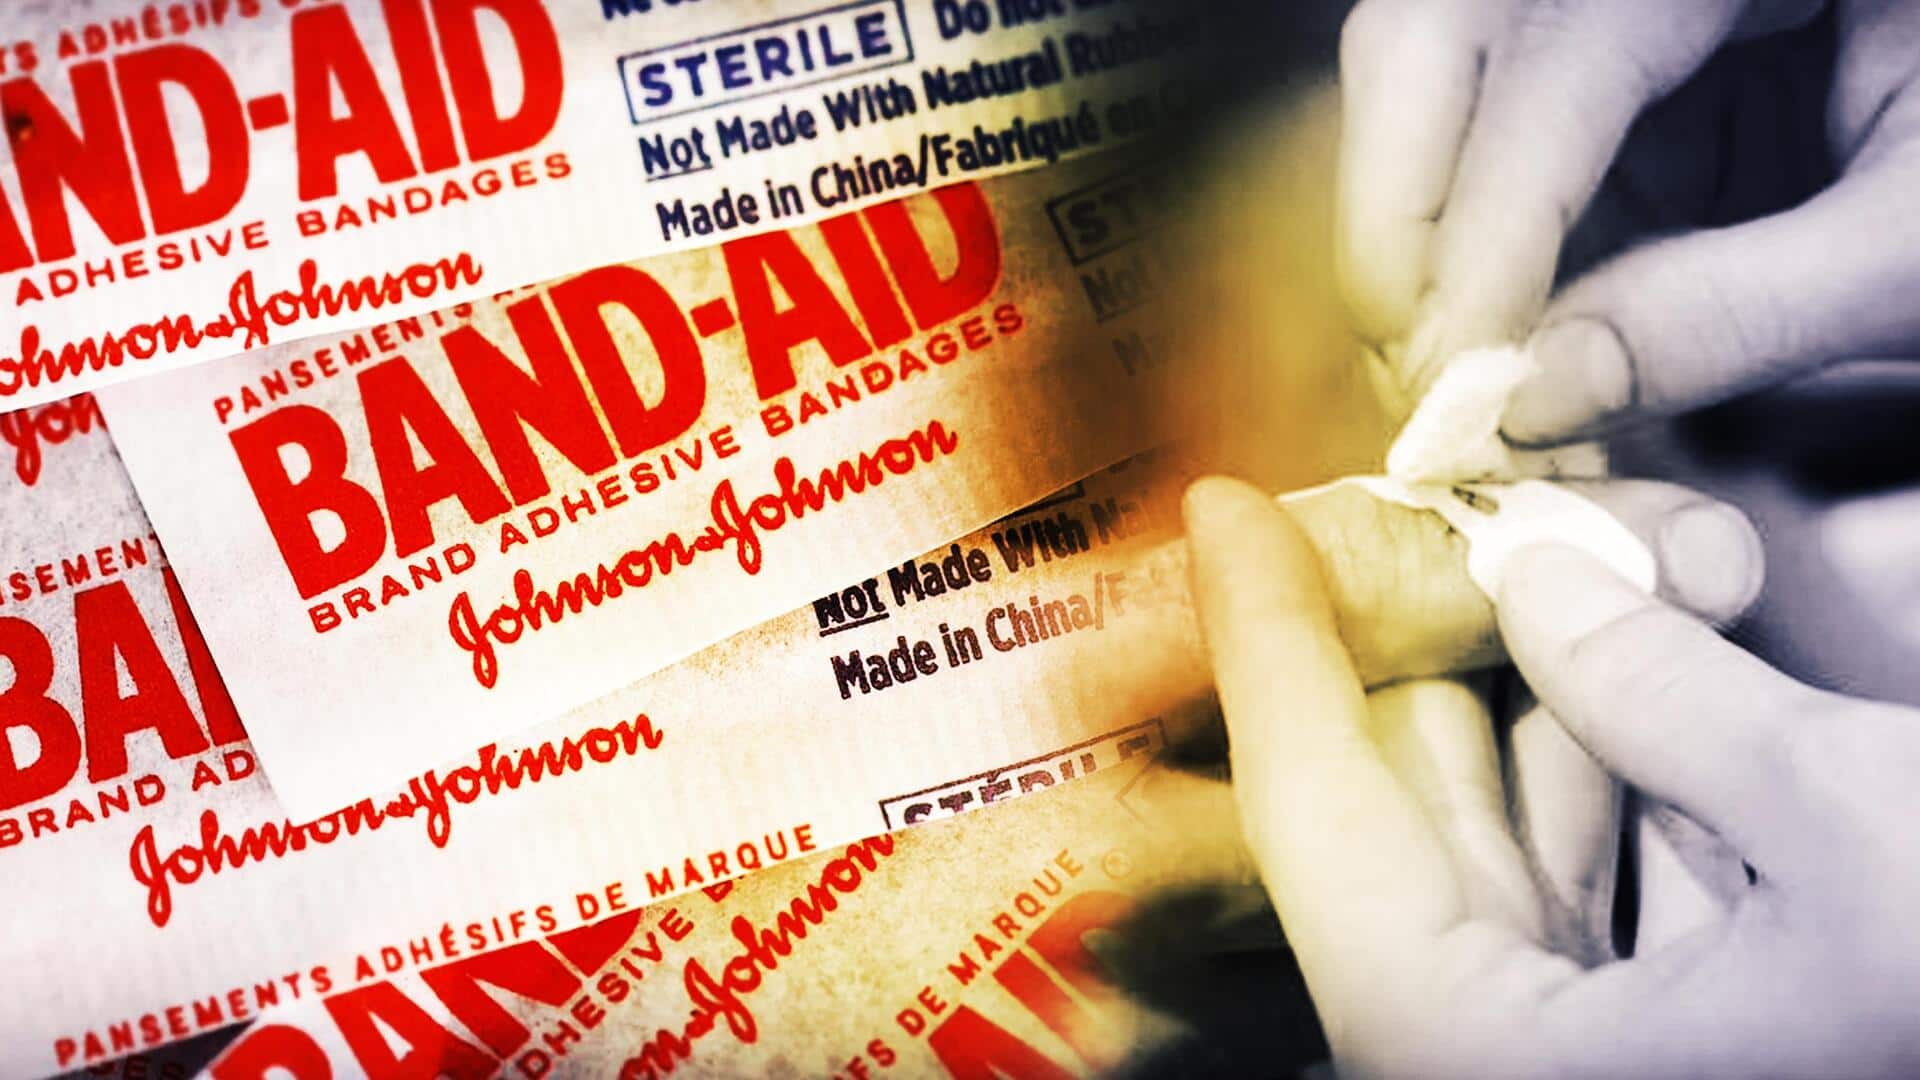 Cancer-causing chemicals found in popular bandage brands: Report